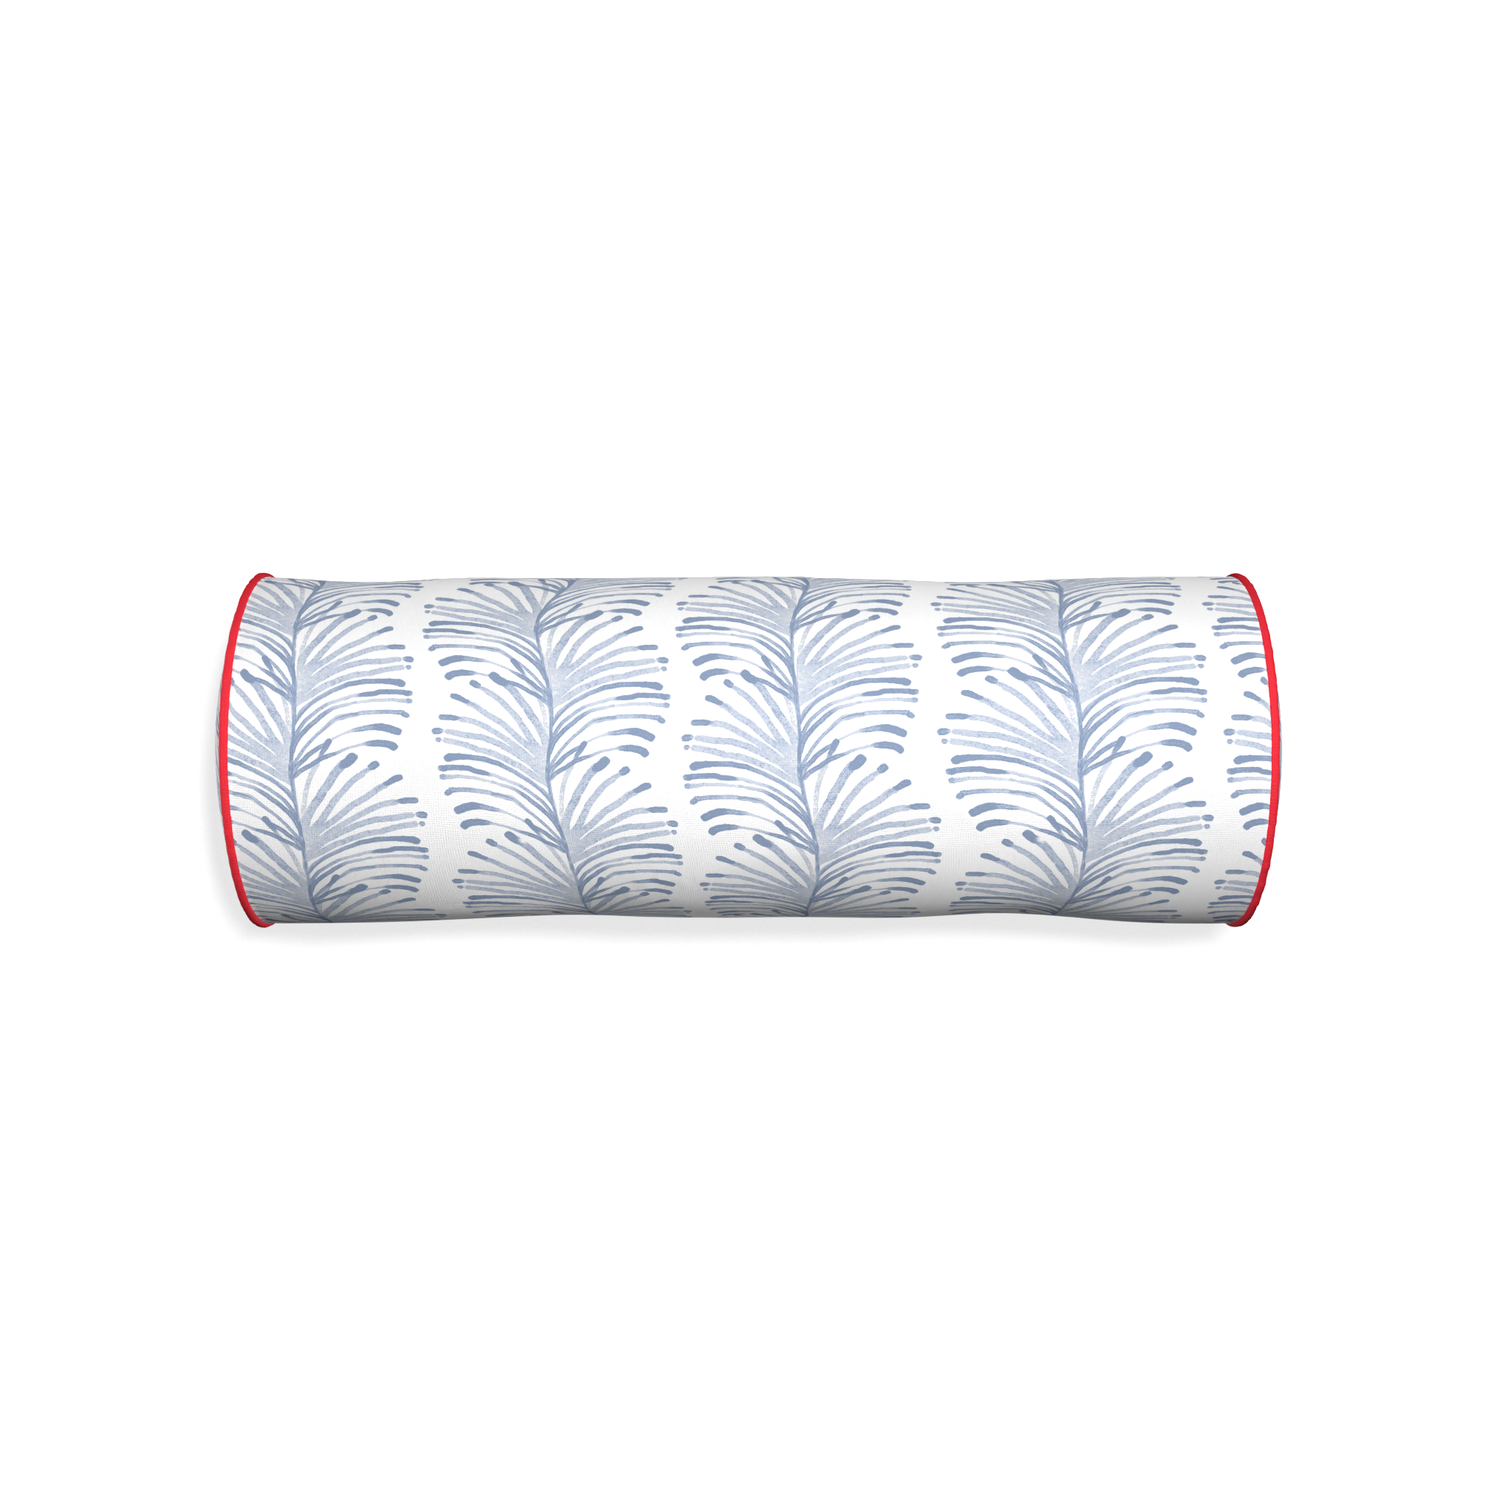 Bolster emma sky custom sky blue botanical stripepillow with cherry piping on white background